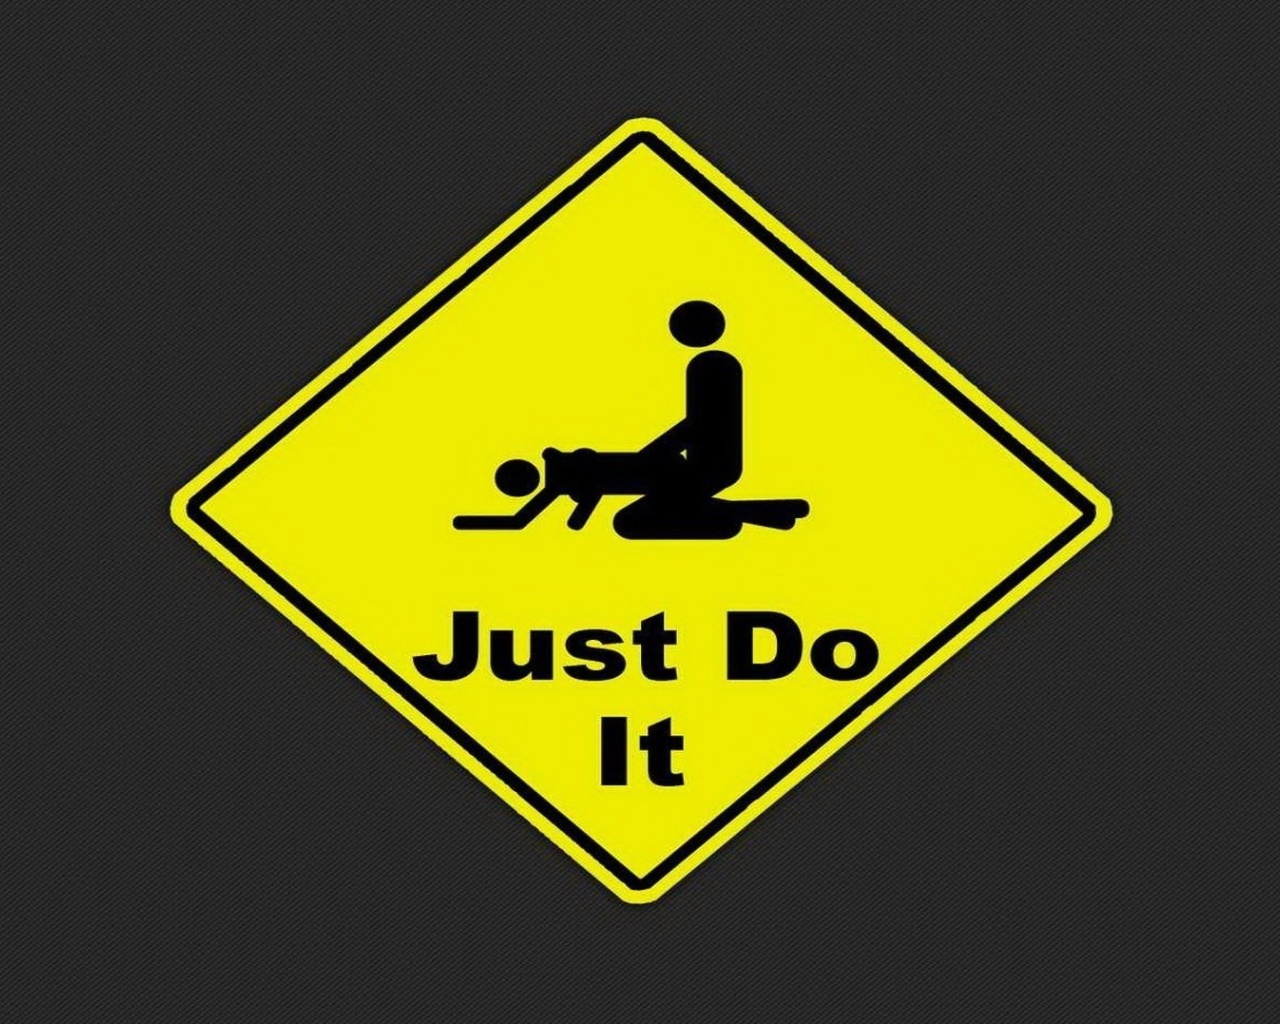 Just Do It Funny Sign wallpaper 1280x1024